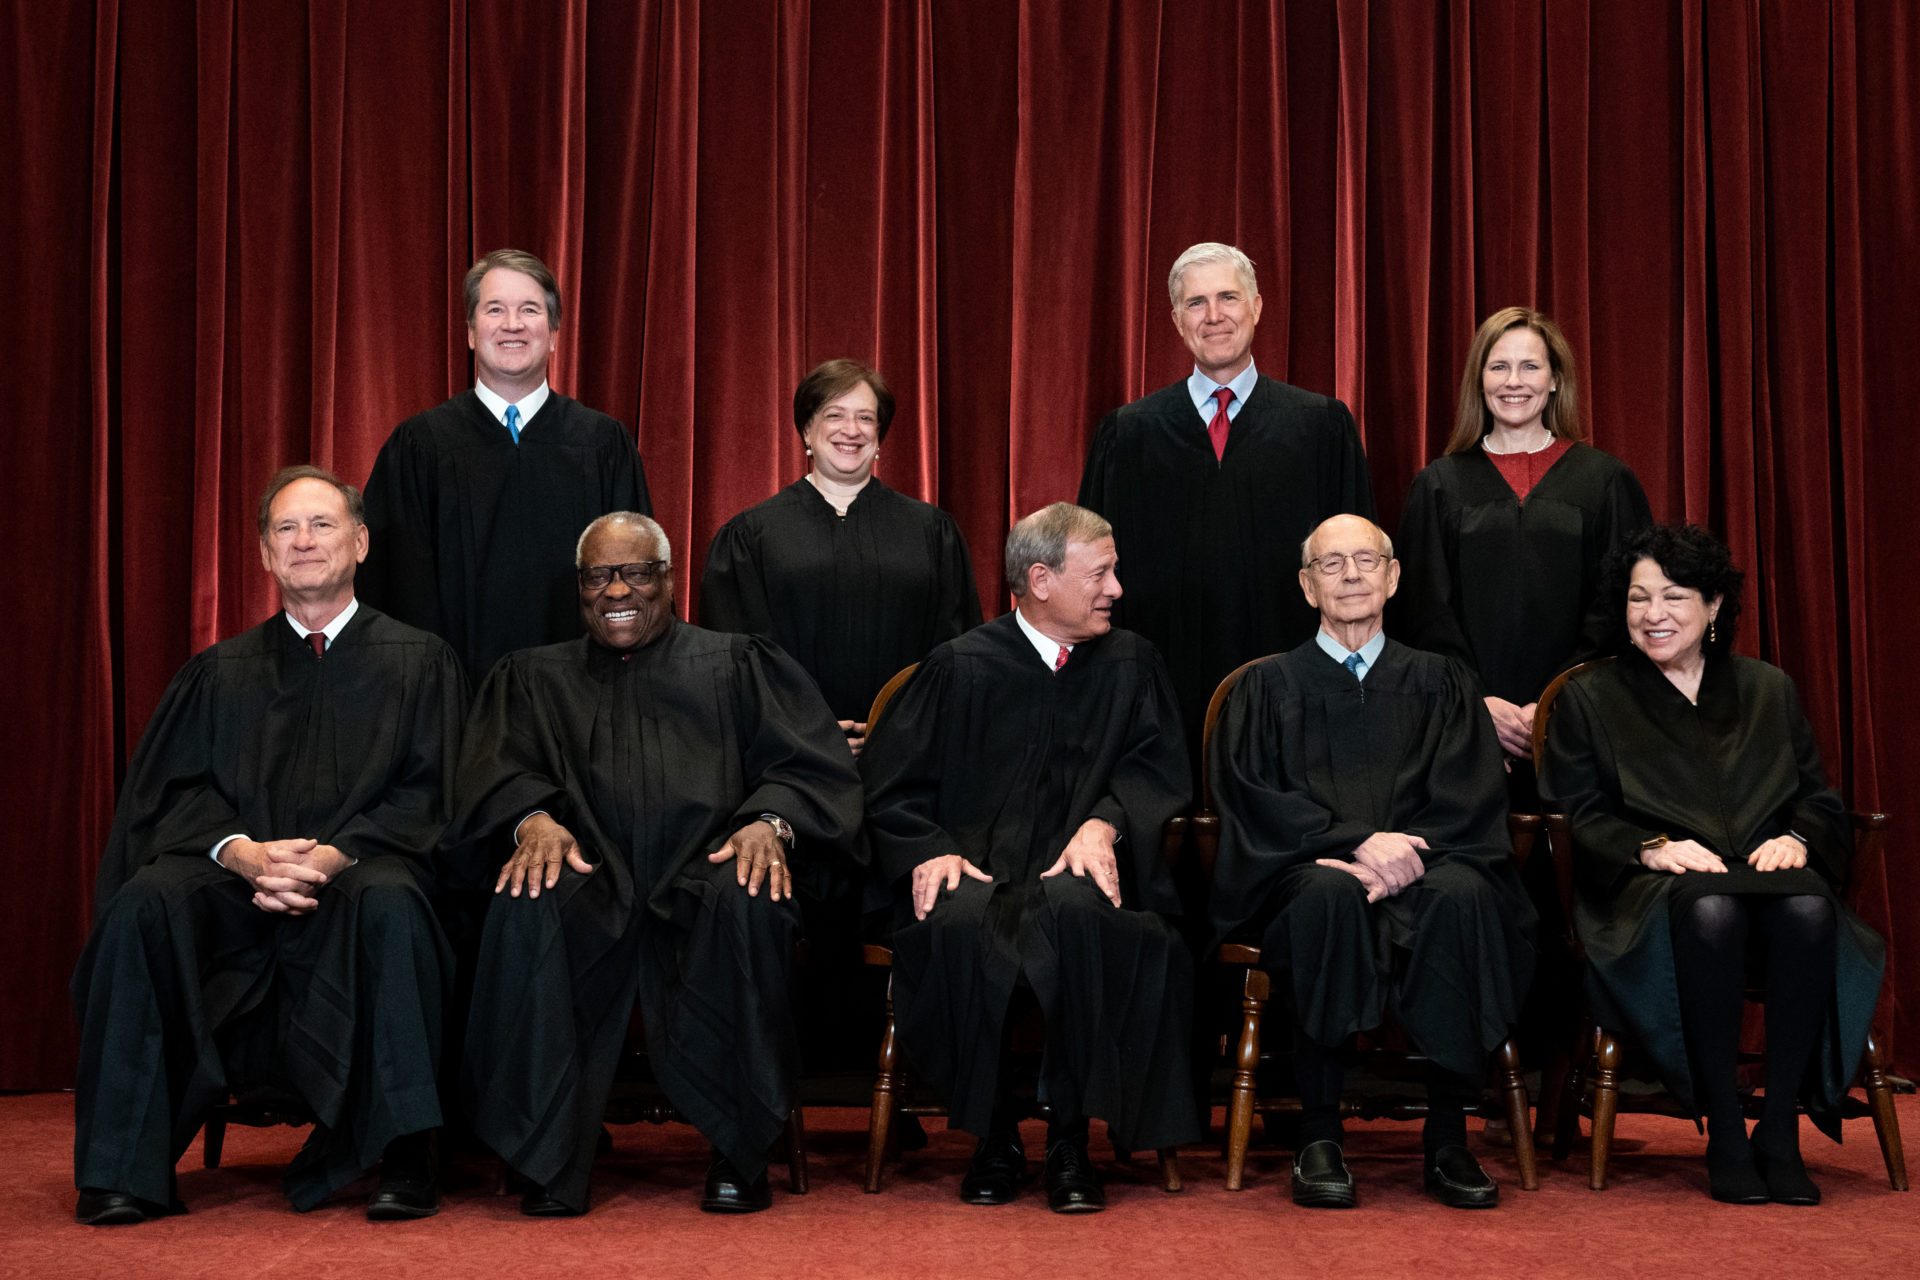 The current US Supreme Court justices #39 average age might surprise you